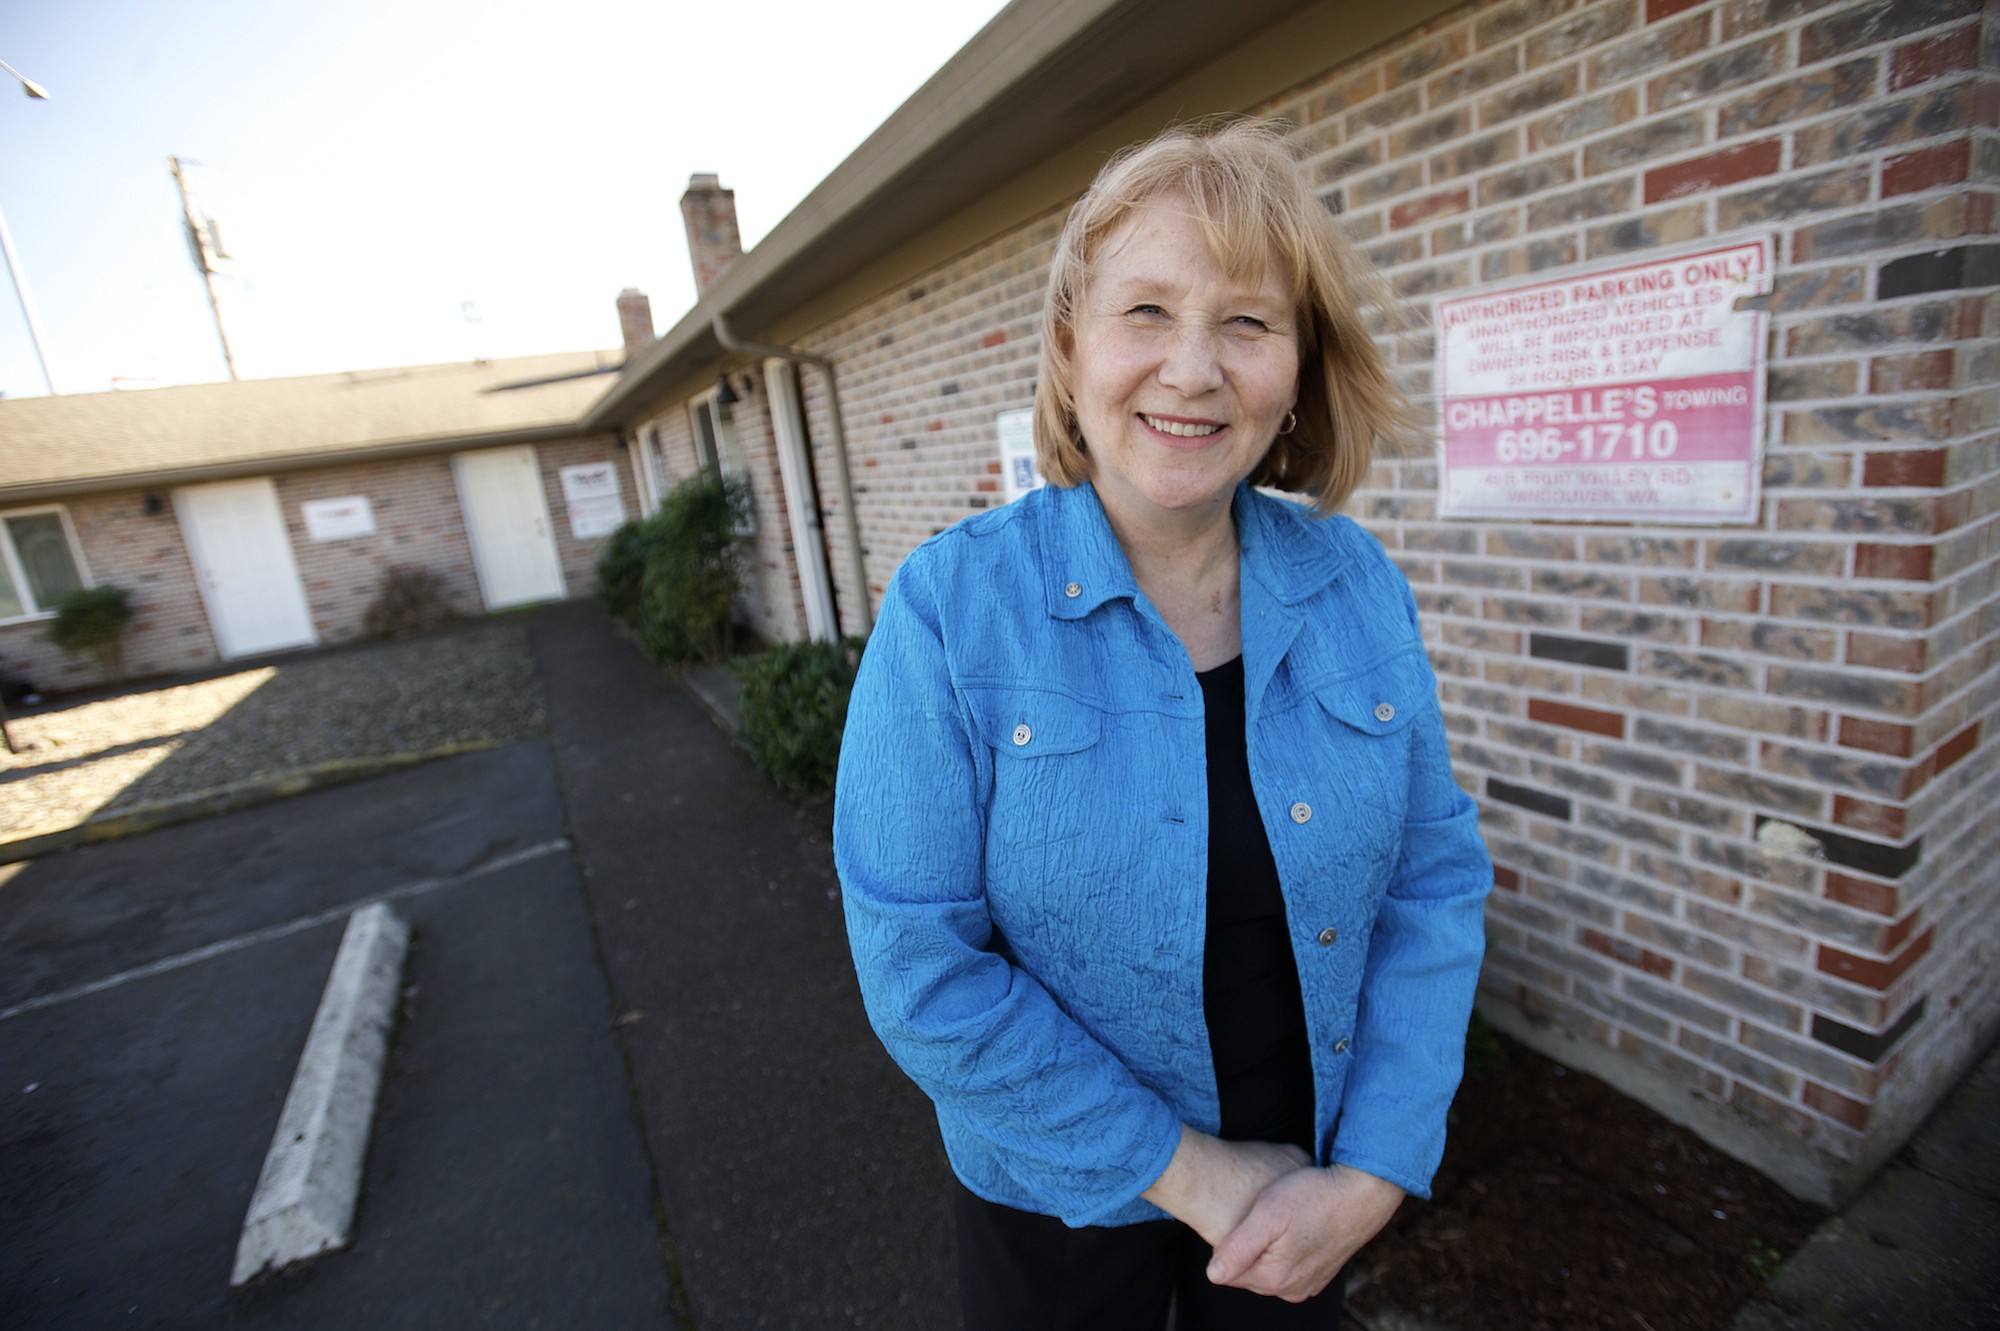 Vancouver City Councilmember Anne McEnerny-Ogle, former president of the Shumway Neighborhood Association, worked with other neighbors and city officials to shutter a massage parlor in their neighborhood.